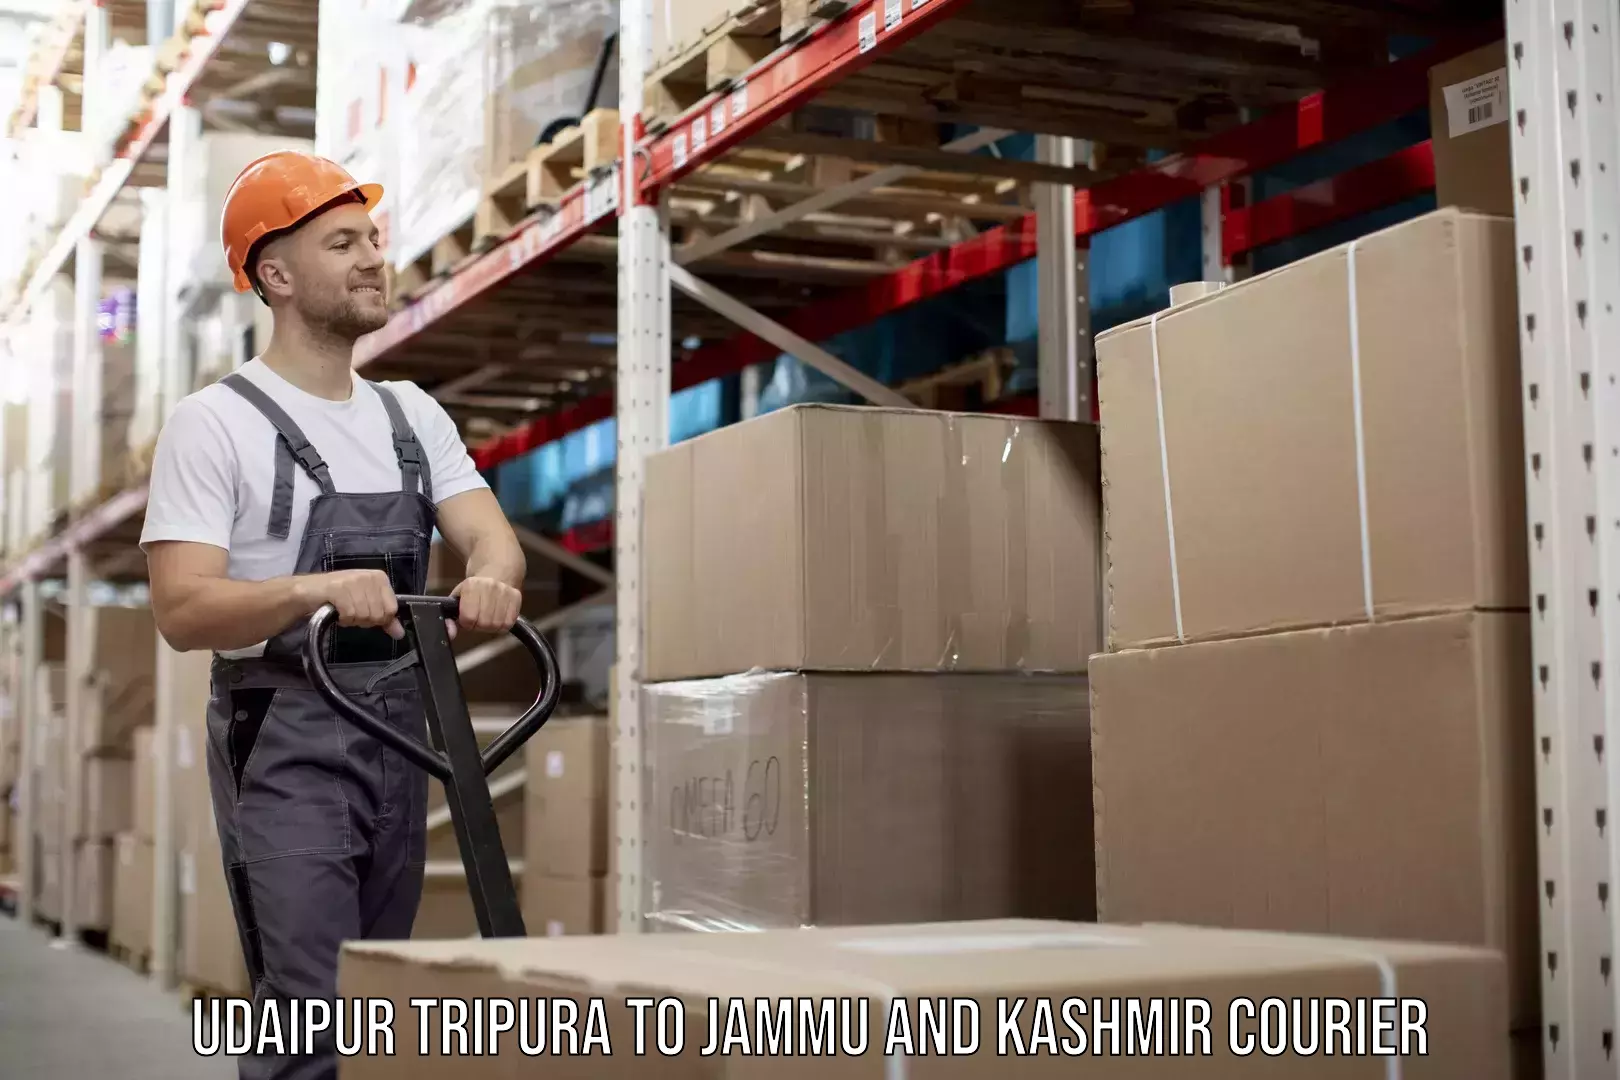 Ocean freight courier Udaipur Tripura to Jammu and Kashmir